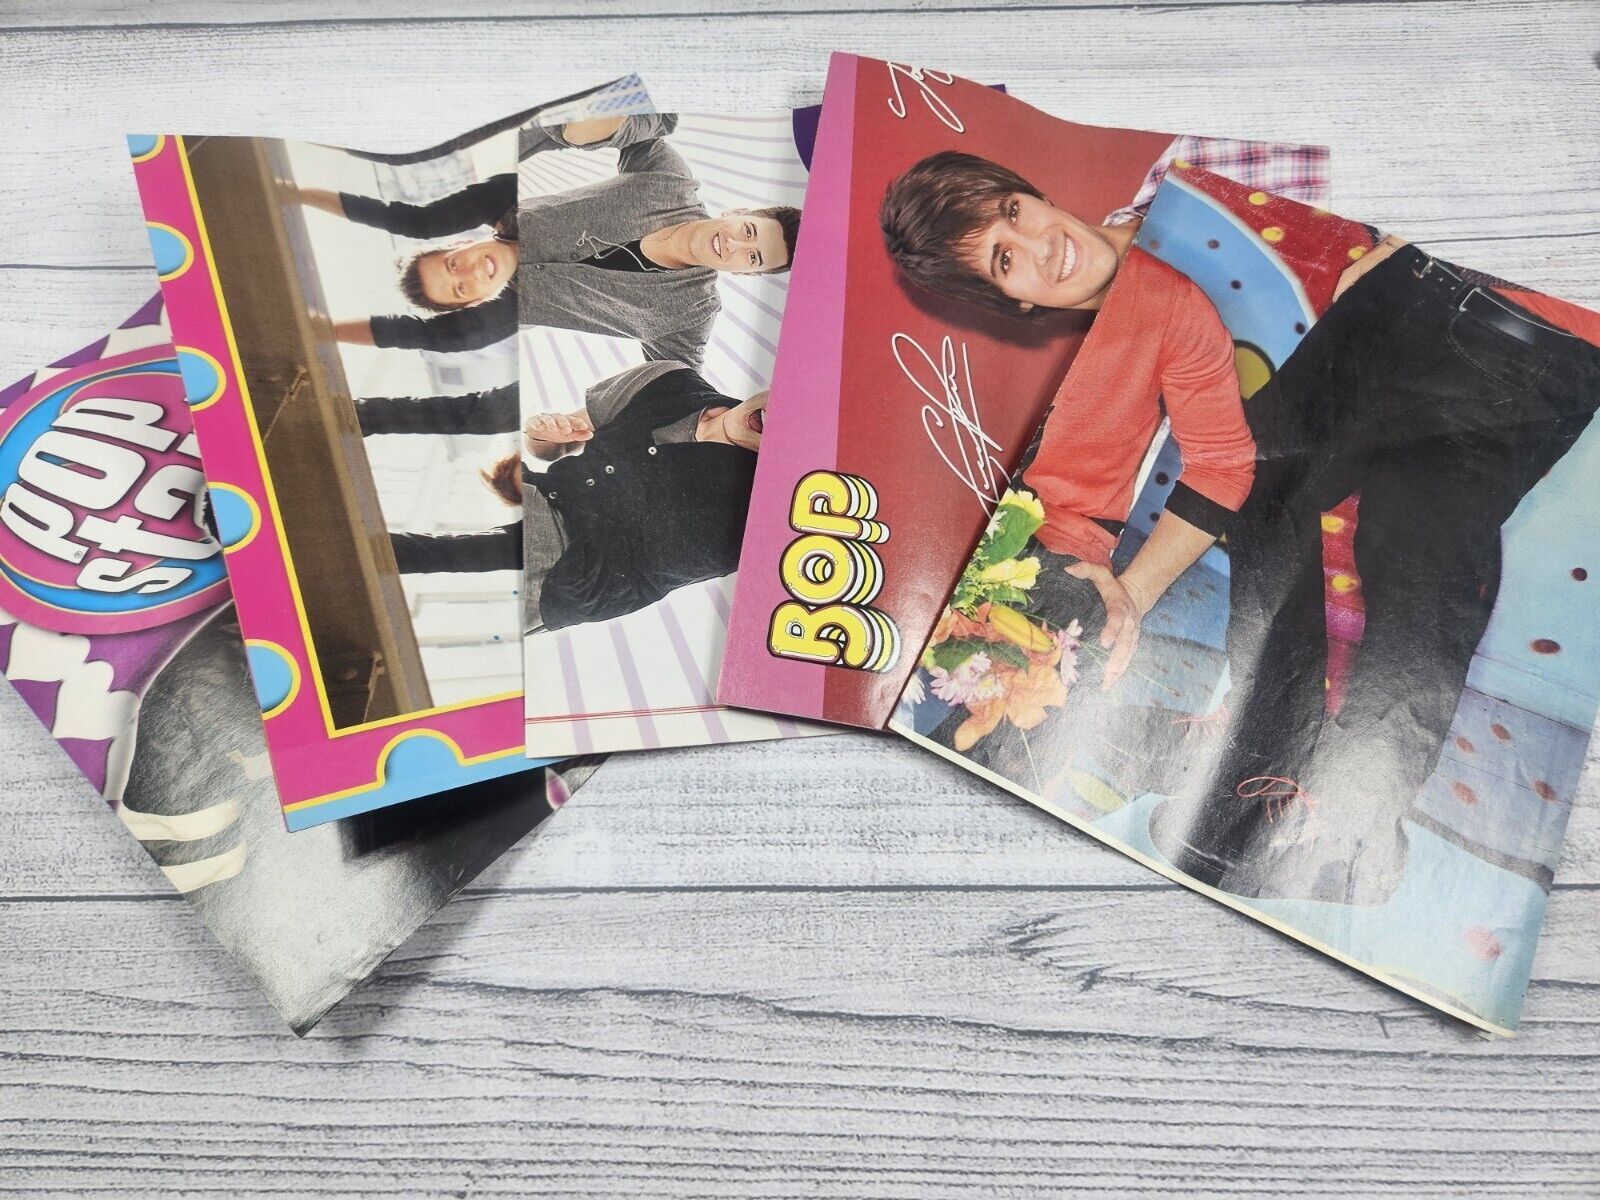 Justin Bieber Big Time Rush Lot of 5 Double sided center fold posters Bop Pop